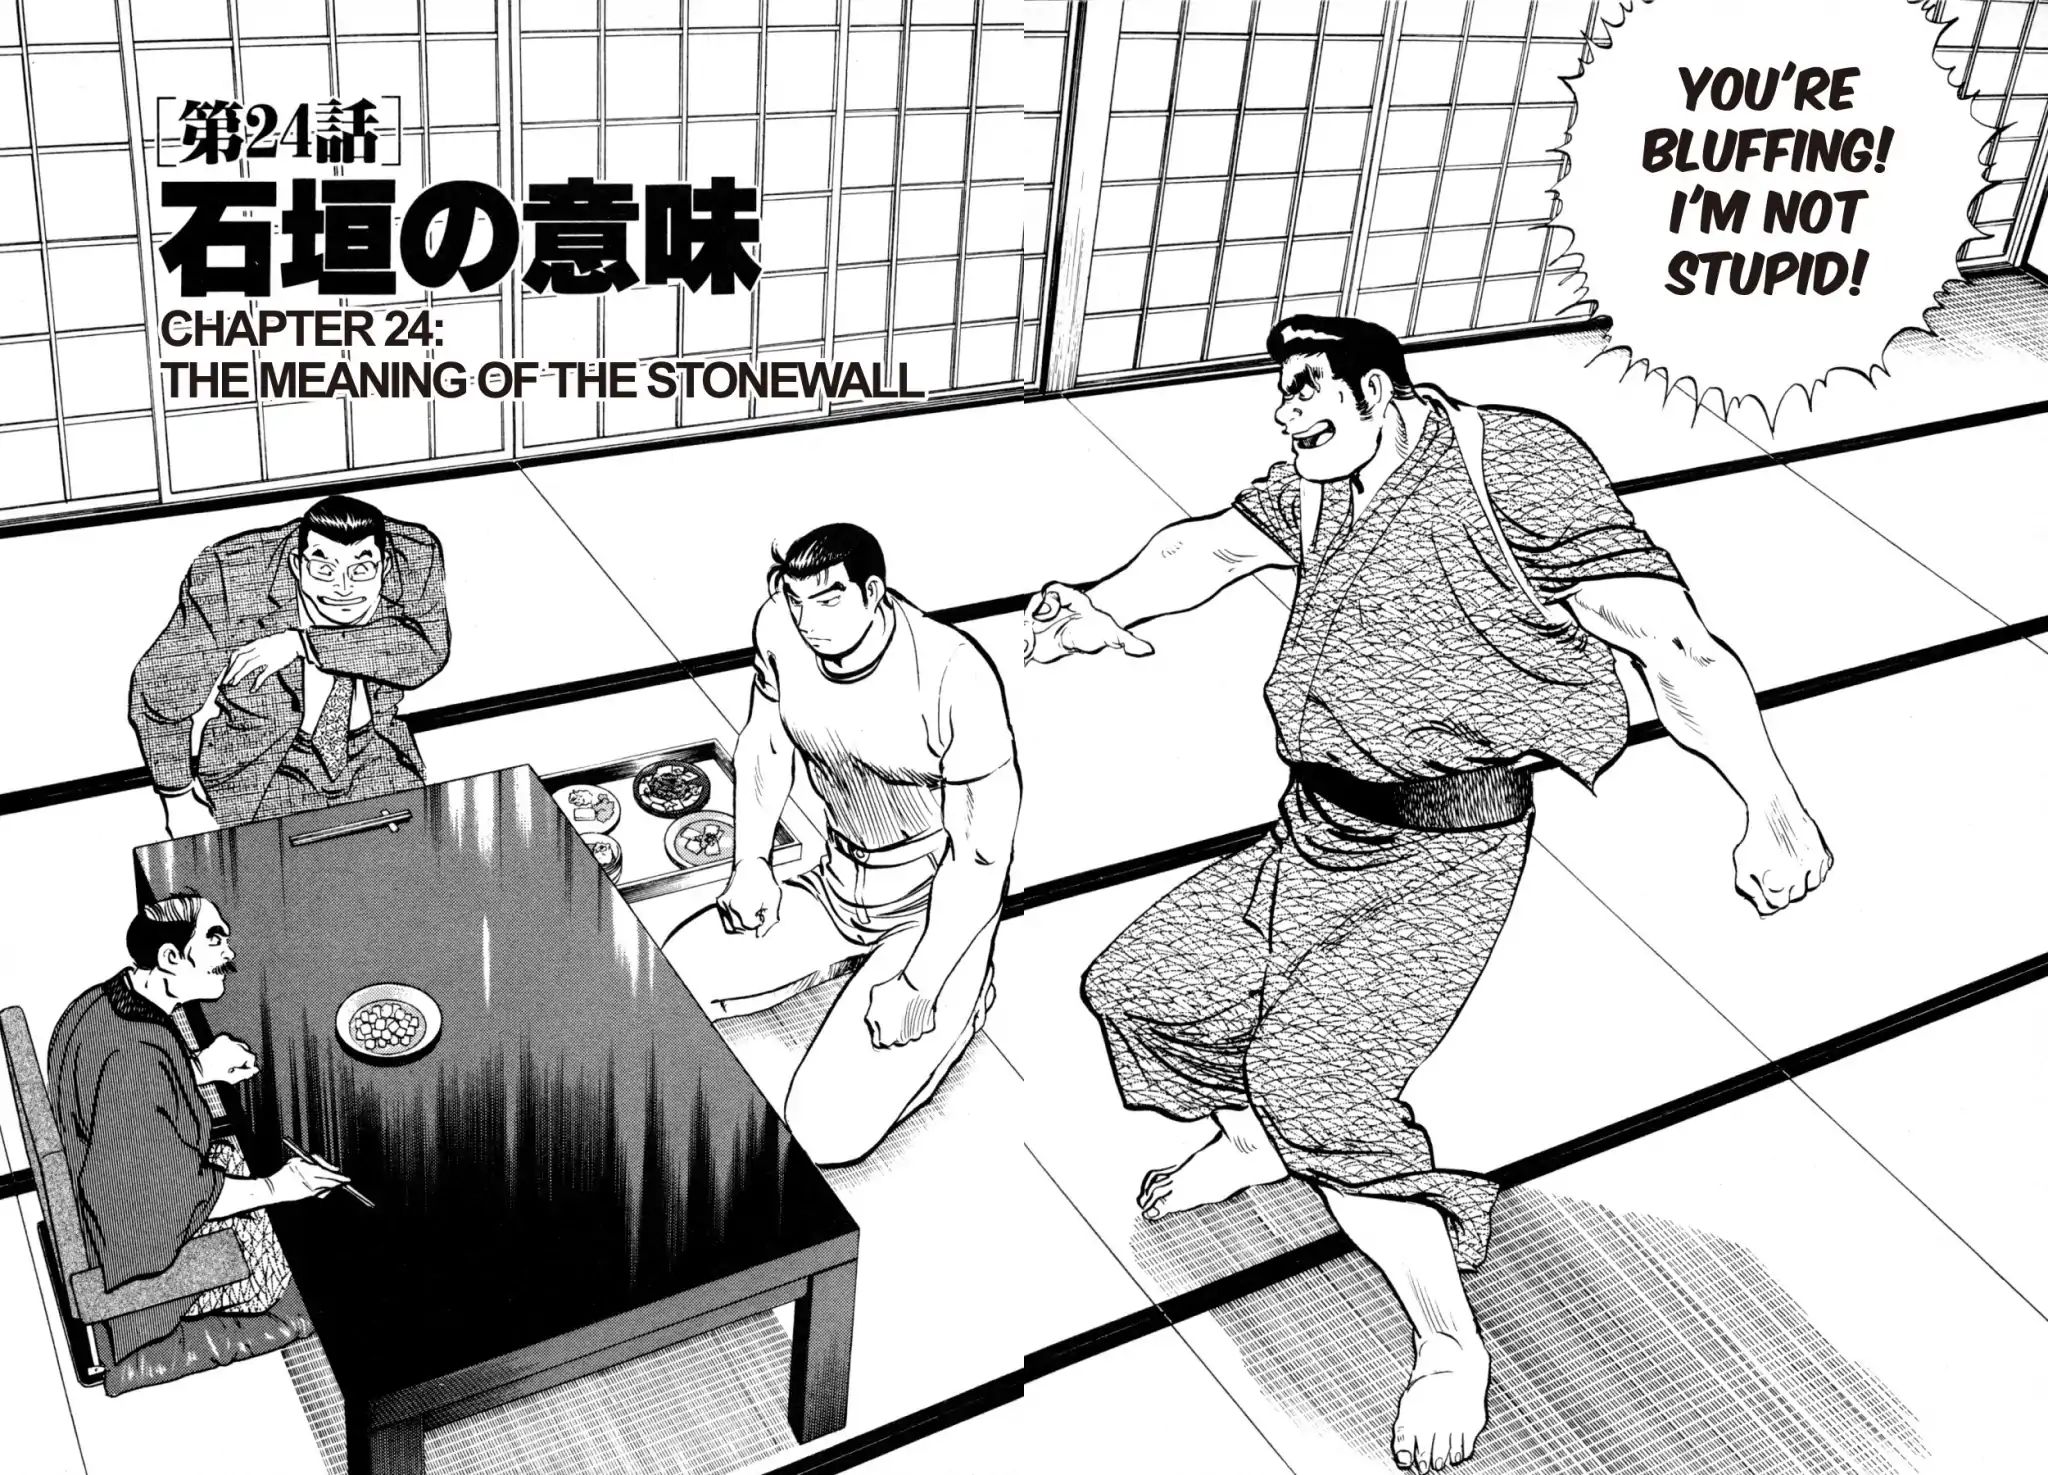 Shoku King VOL.3 CHAPTER 24: THE MEANING OF THE STONEWALL